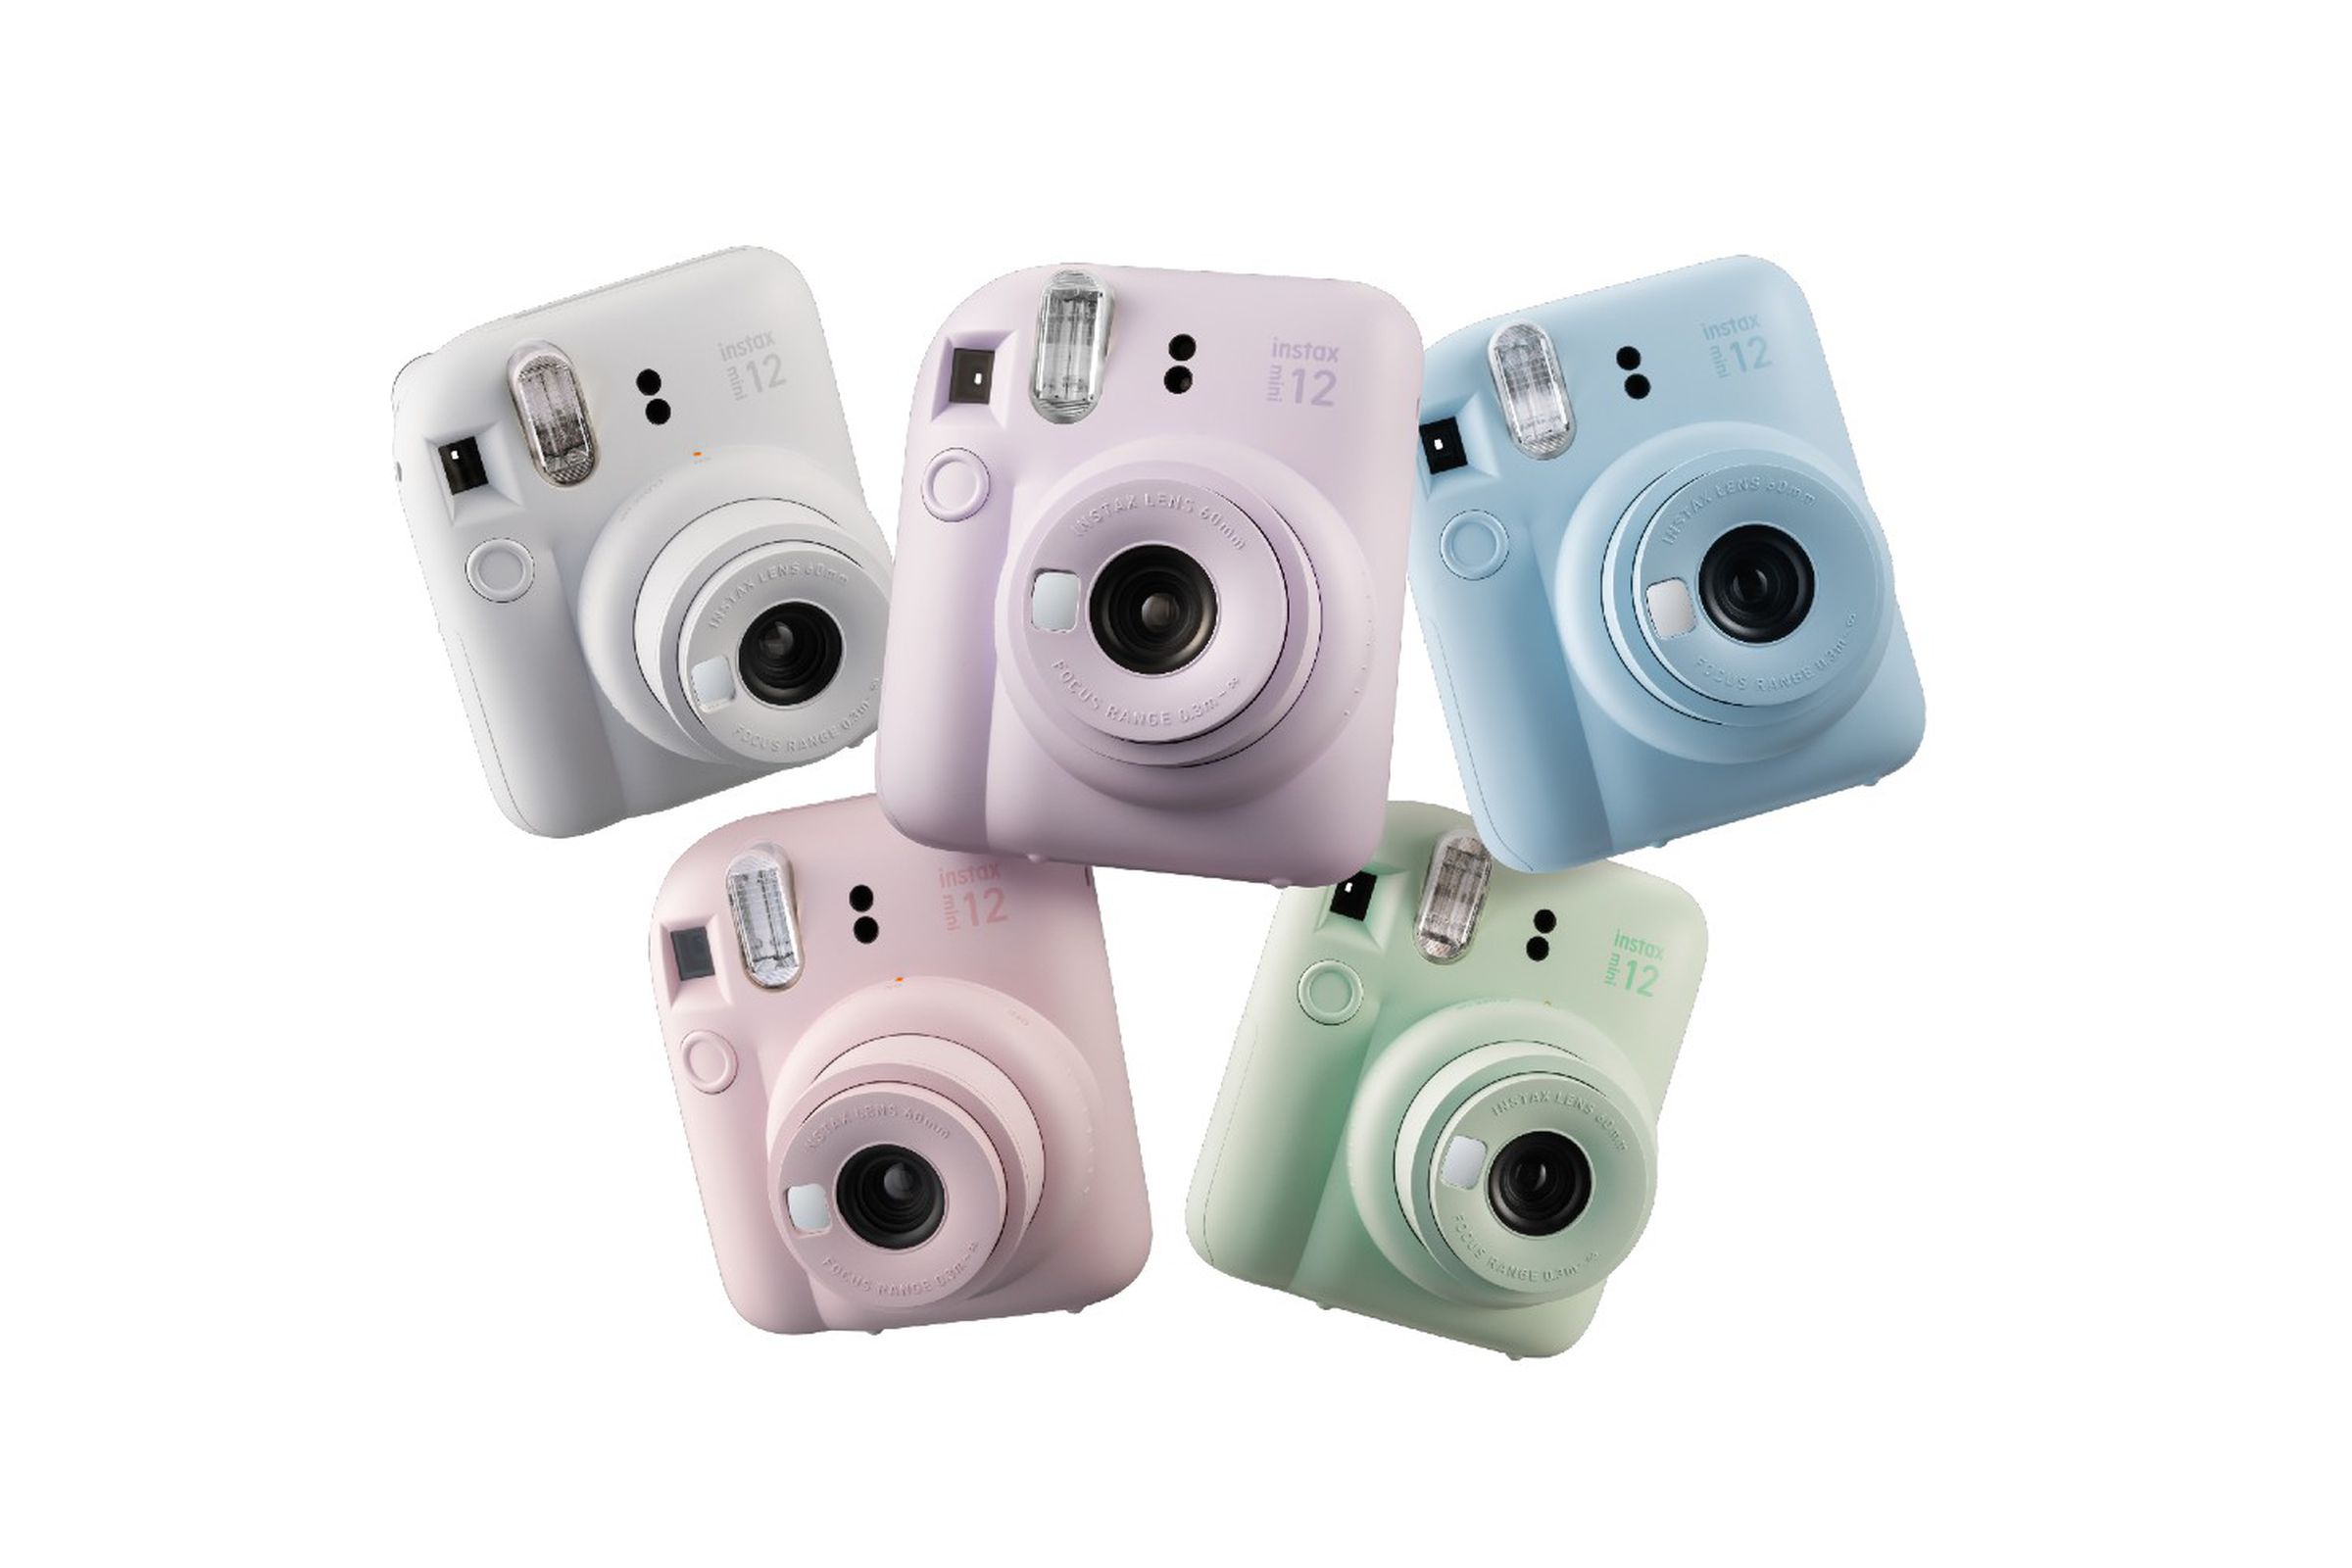 White, purple, pink, blue, and green Fujifilm Instax Mini 12 instant cameras against a white background.